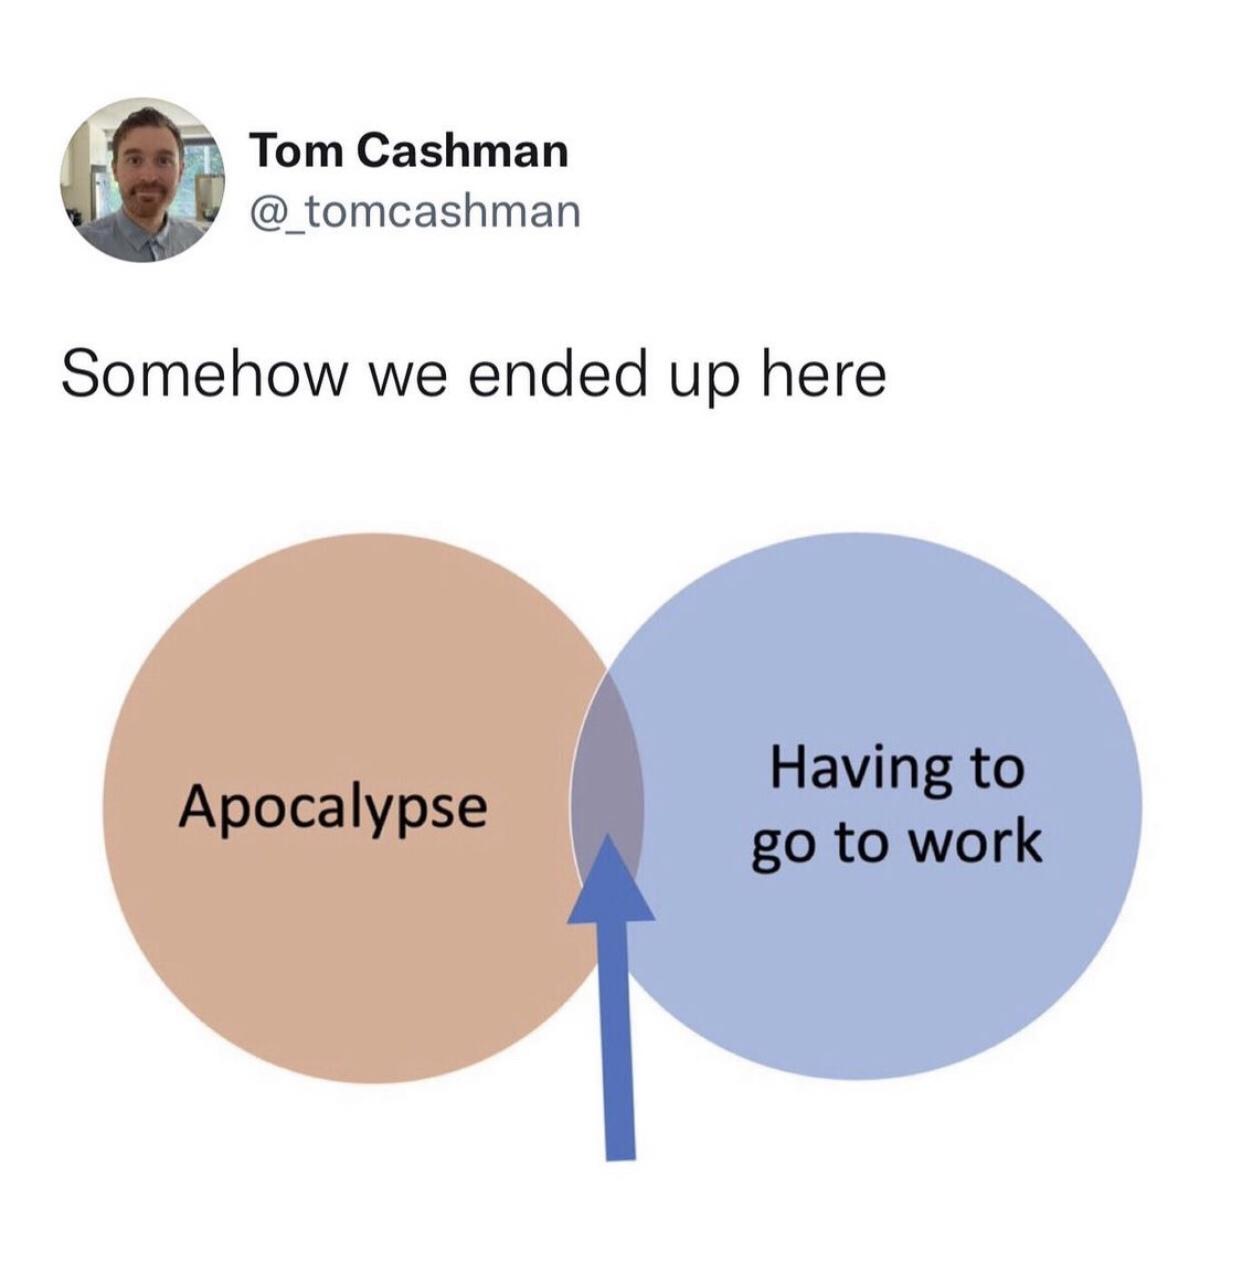 cool random pics - cool pics and memes somehow we ended up here meme - Tom Cashman Somehow we ended up here Apocalypse Having to go to work